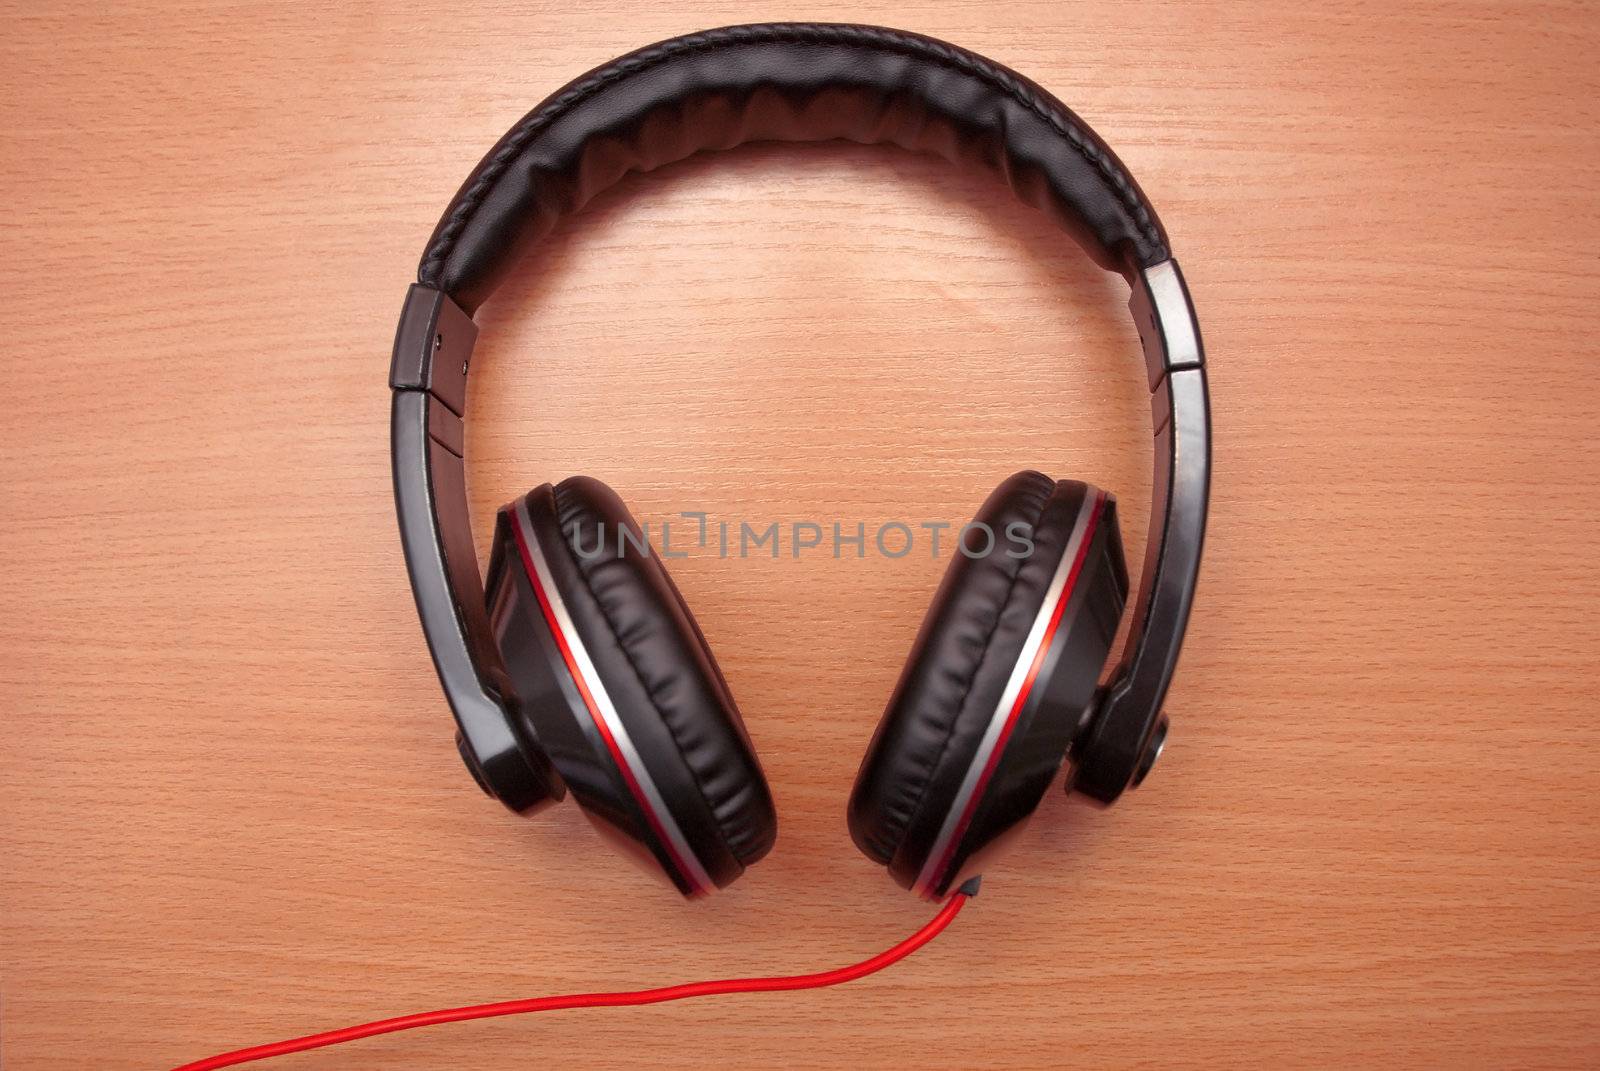 Stylish headphones on a wooden background.